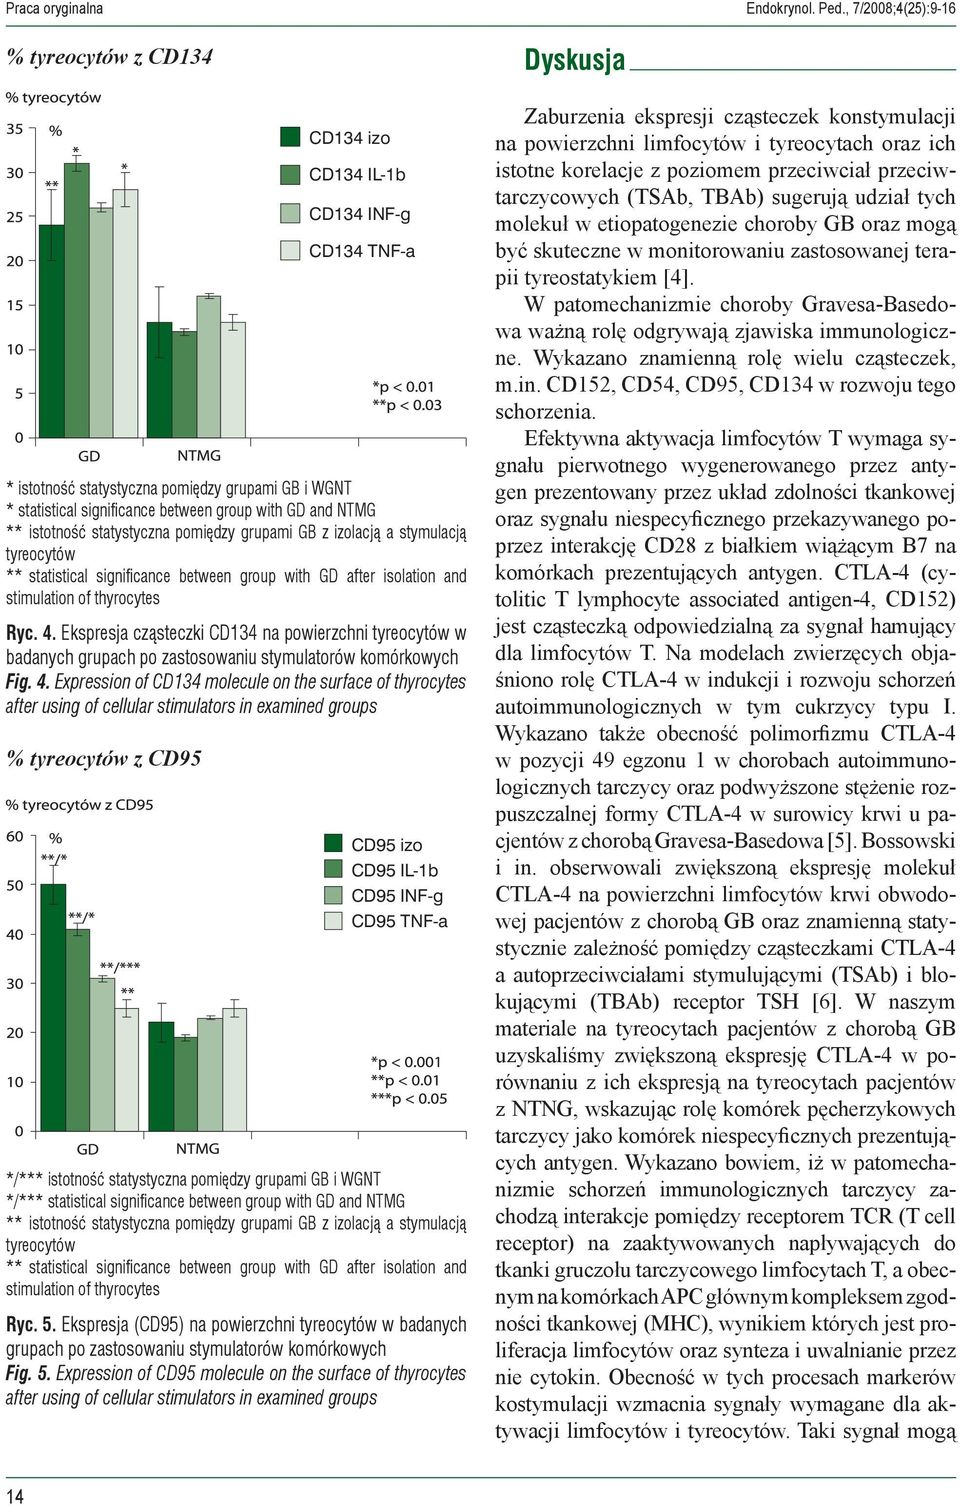 izolacją a stymulacją tyreocytów ** statistical significance between group with GD after isolation and stimulation of thyrocytes Ryc. 4.